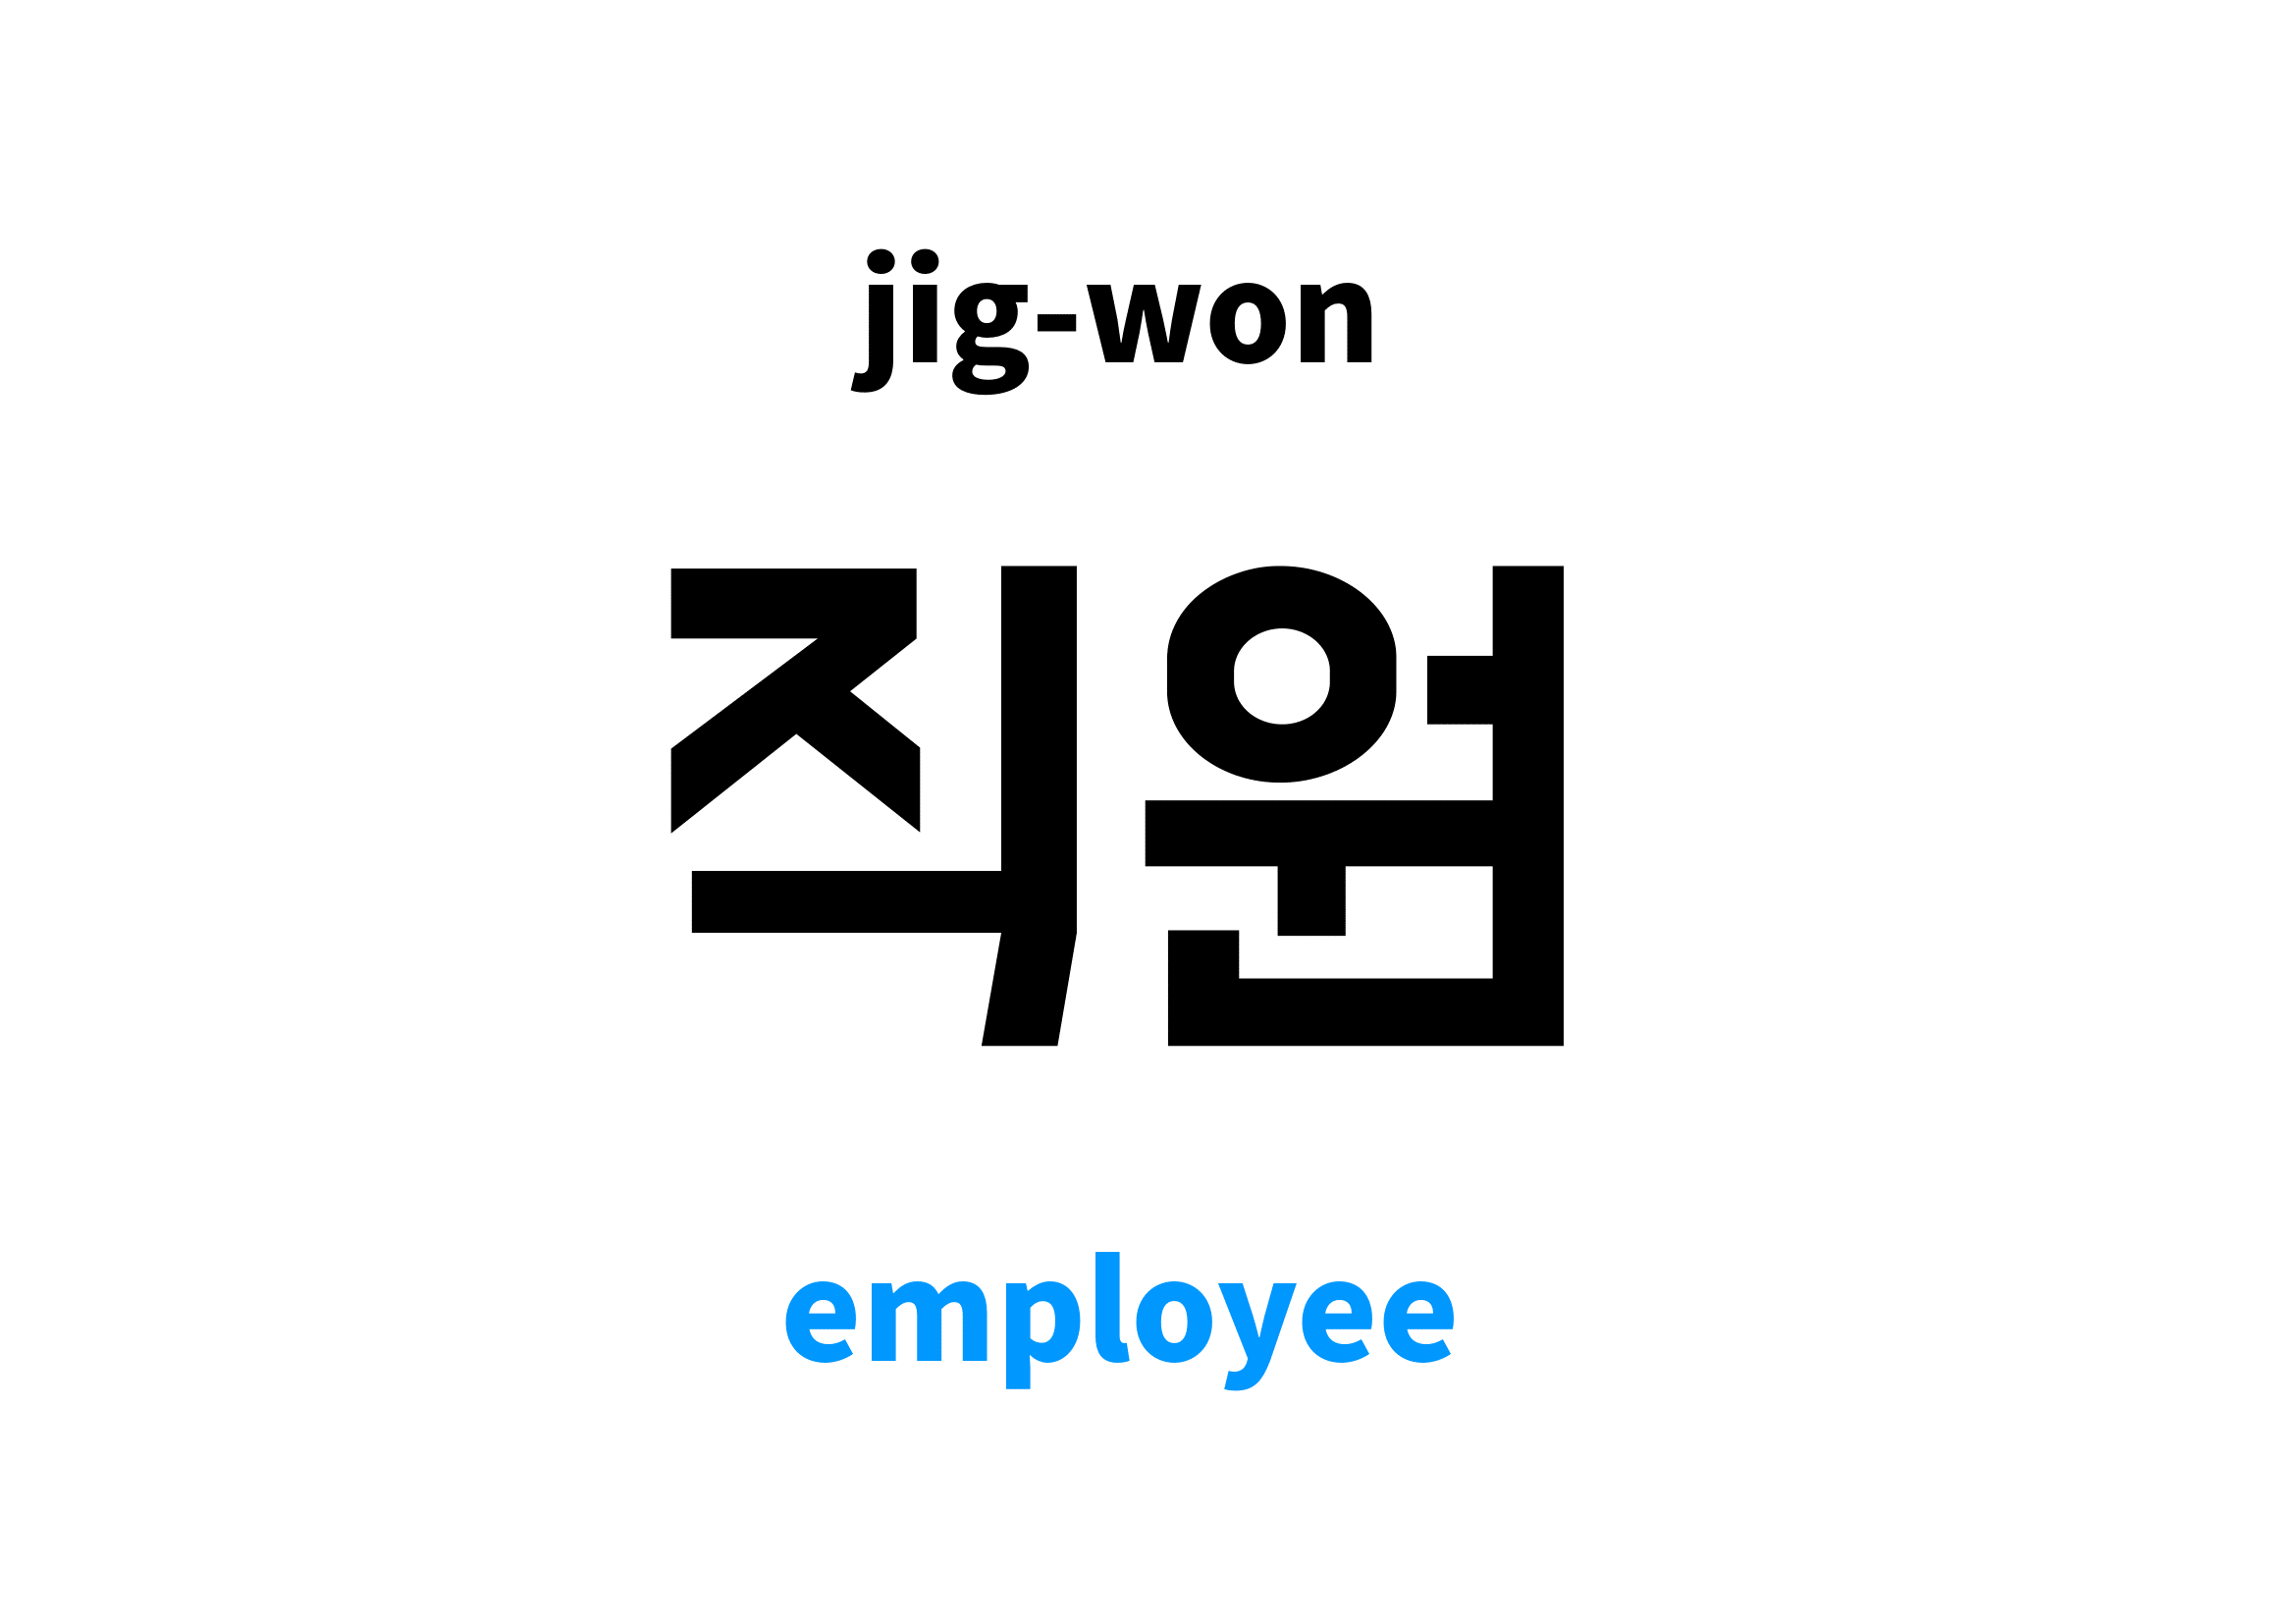 Employee in Korean, 직원 meaning